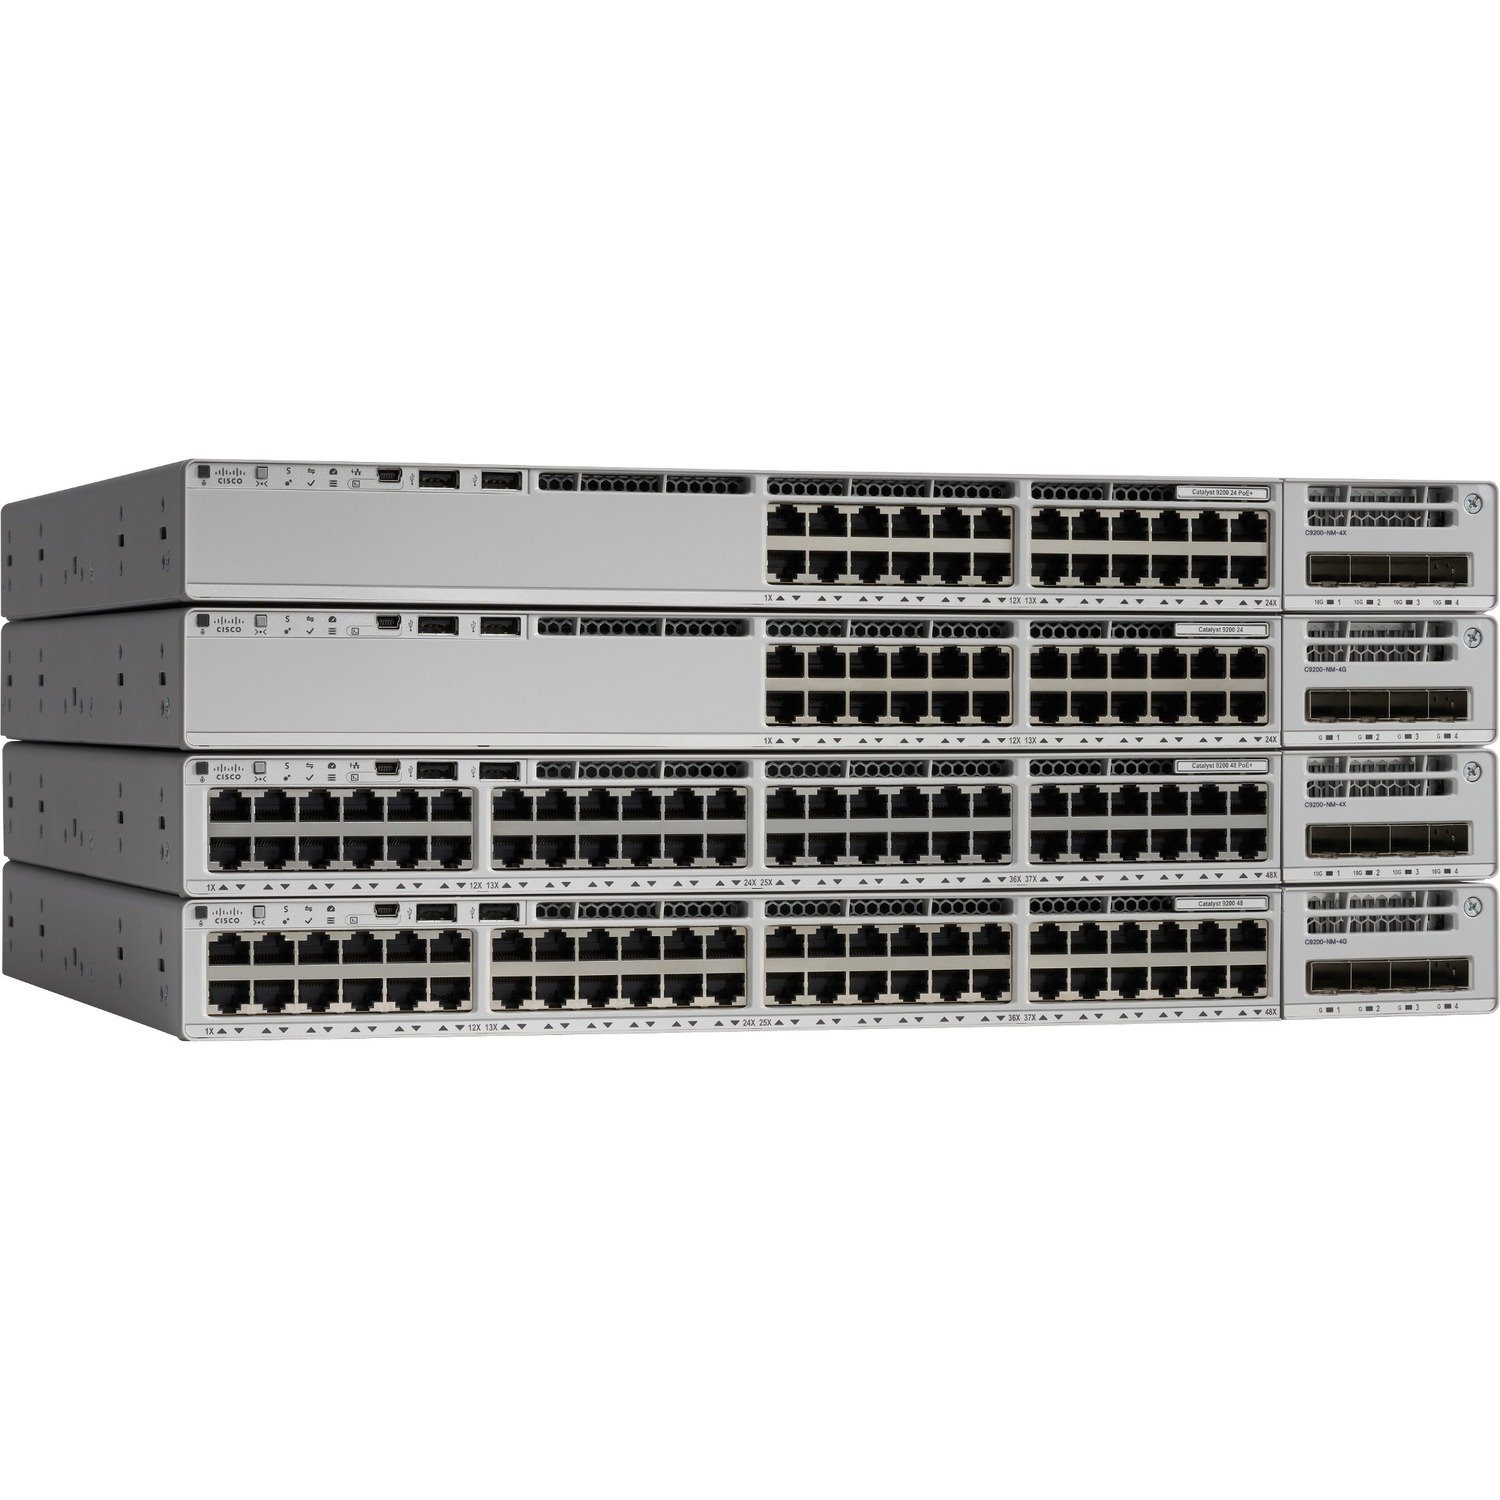 Cisco Catalyst 9200 C9200-48P 48 Ports Manageable Layer 3 Switch